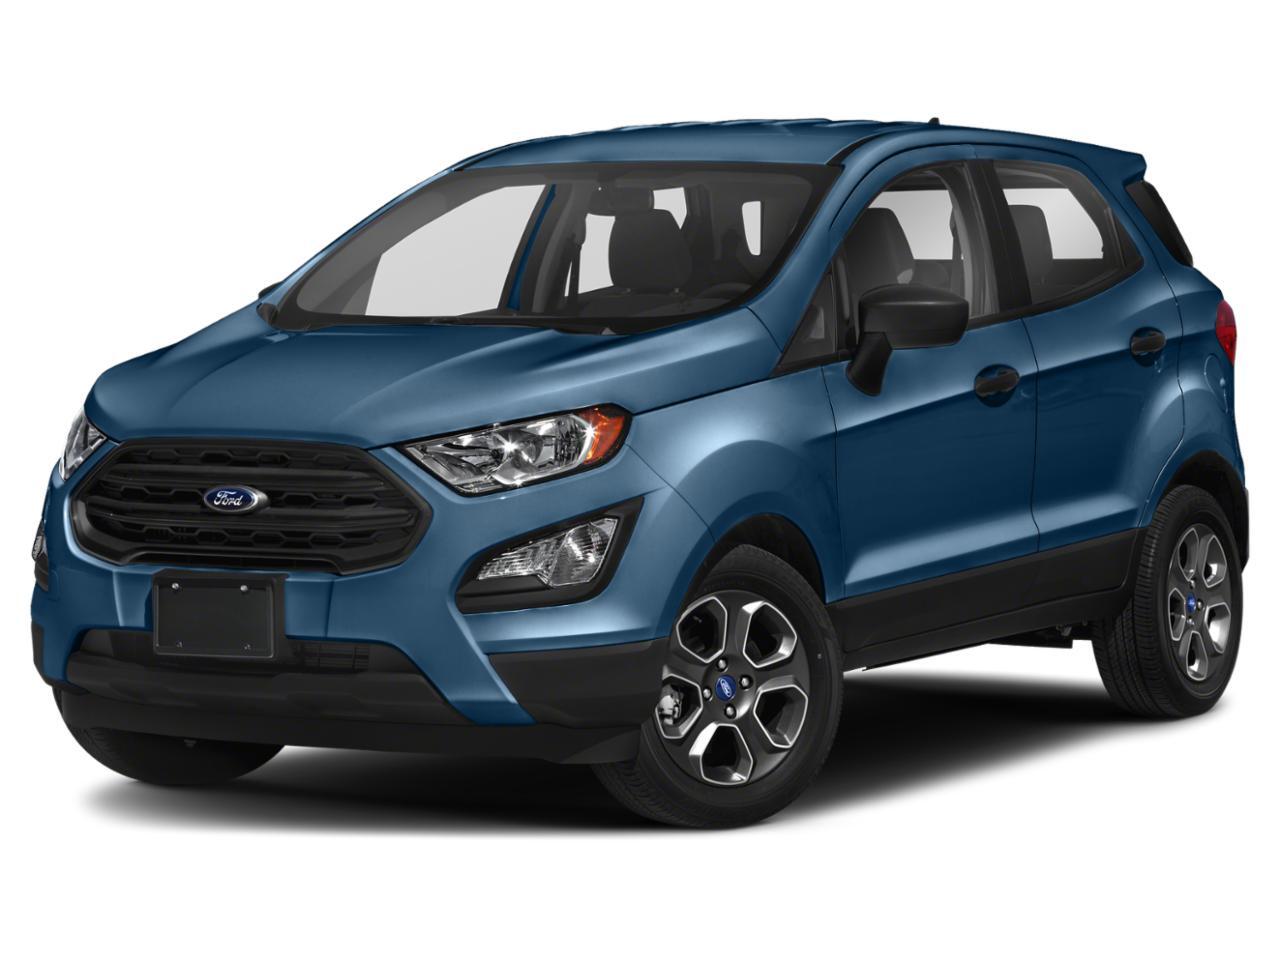 2019 Ford EcoSport SES 4WD  - Navigation -  Sunroof - $149 B/W